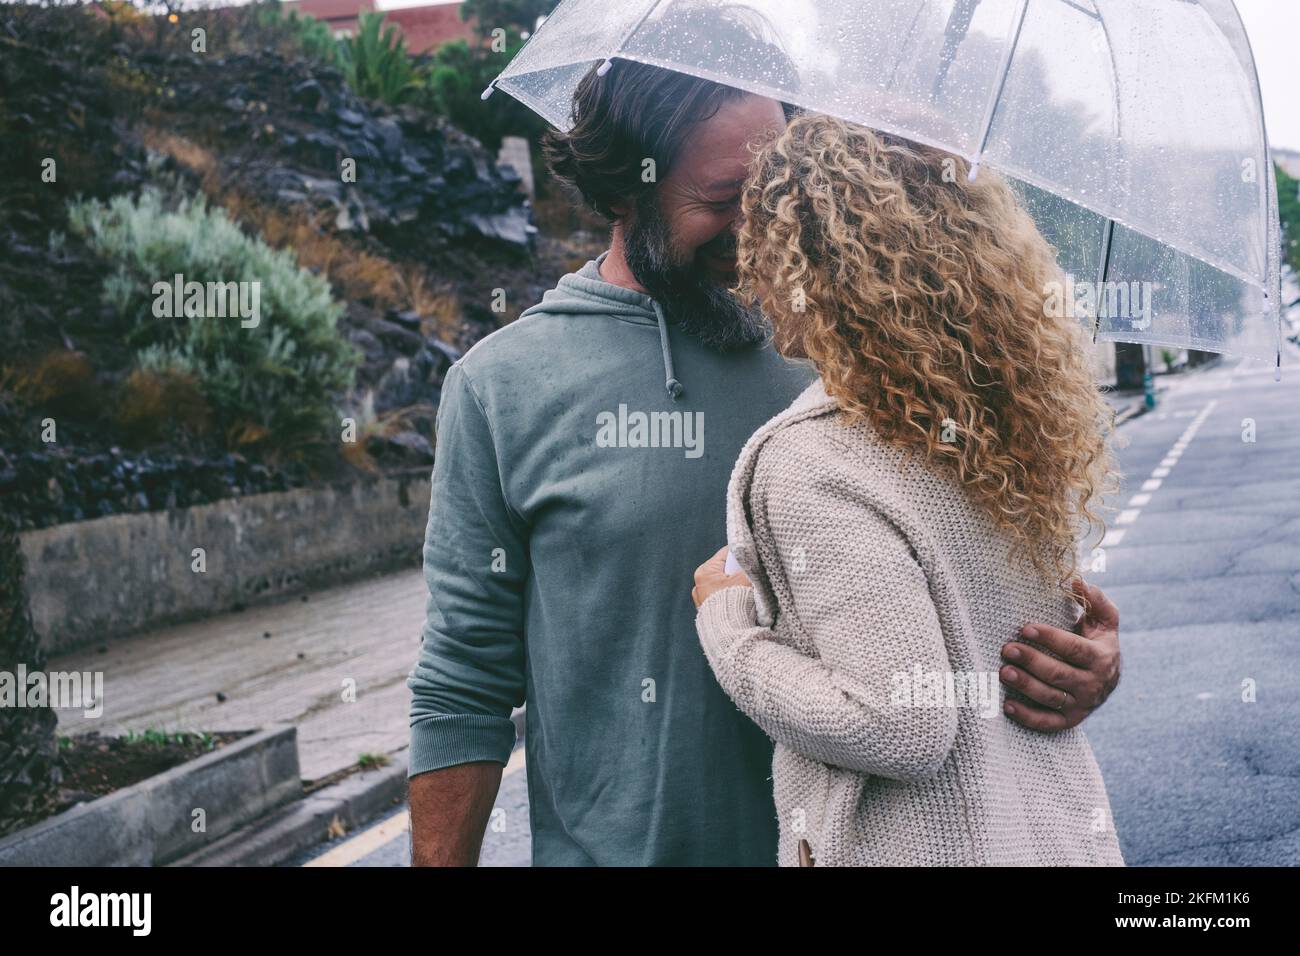 Couple enjoy outdoor leisure activity in rainy day of bad weather hugging and kissing under a transparent umbrella with road street urban in backgroun Stock Photo